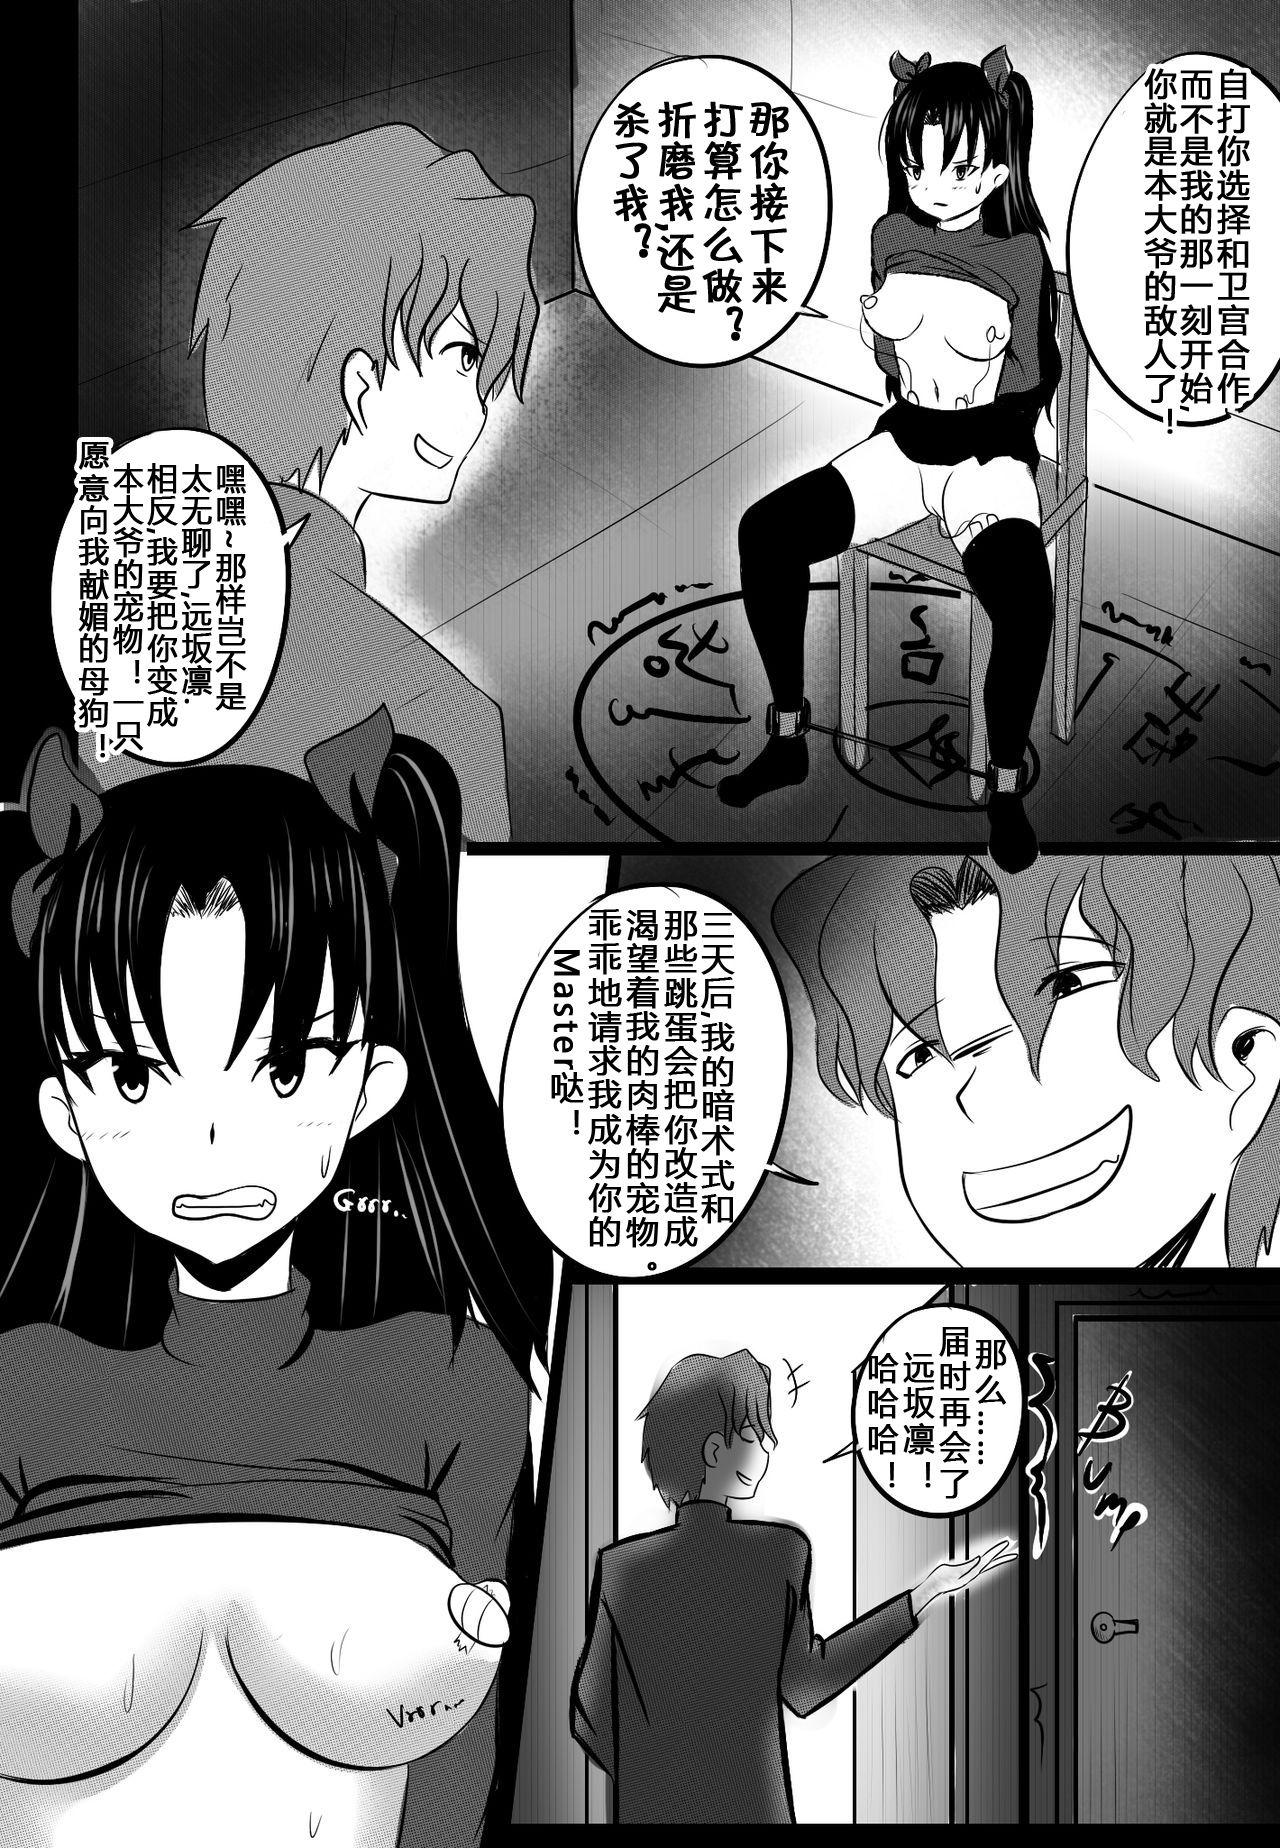 Massages B-Trayal 6 - Fate stay night Hairy Pussy - Page 5